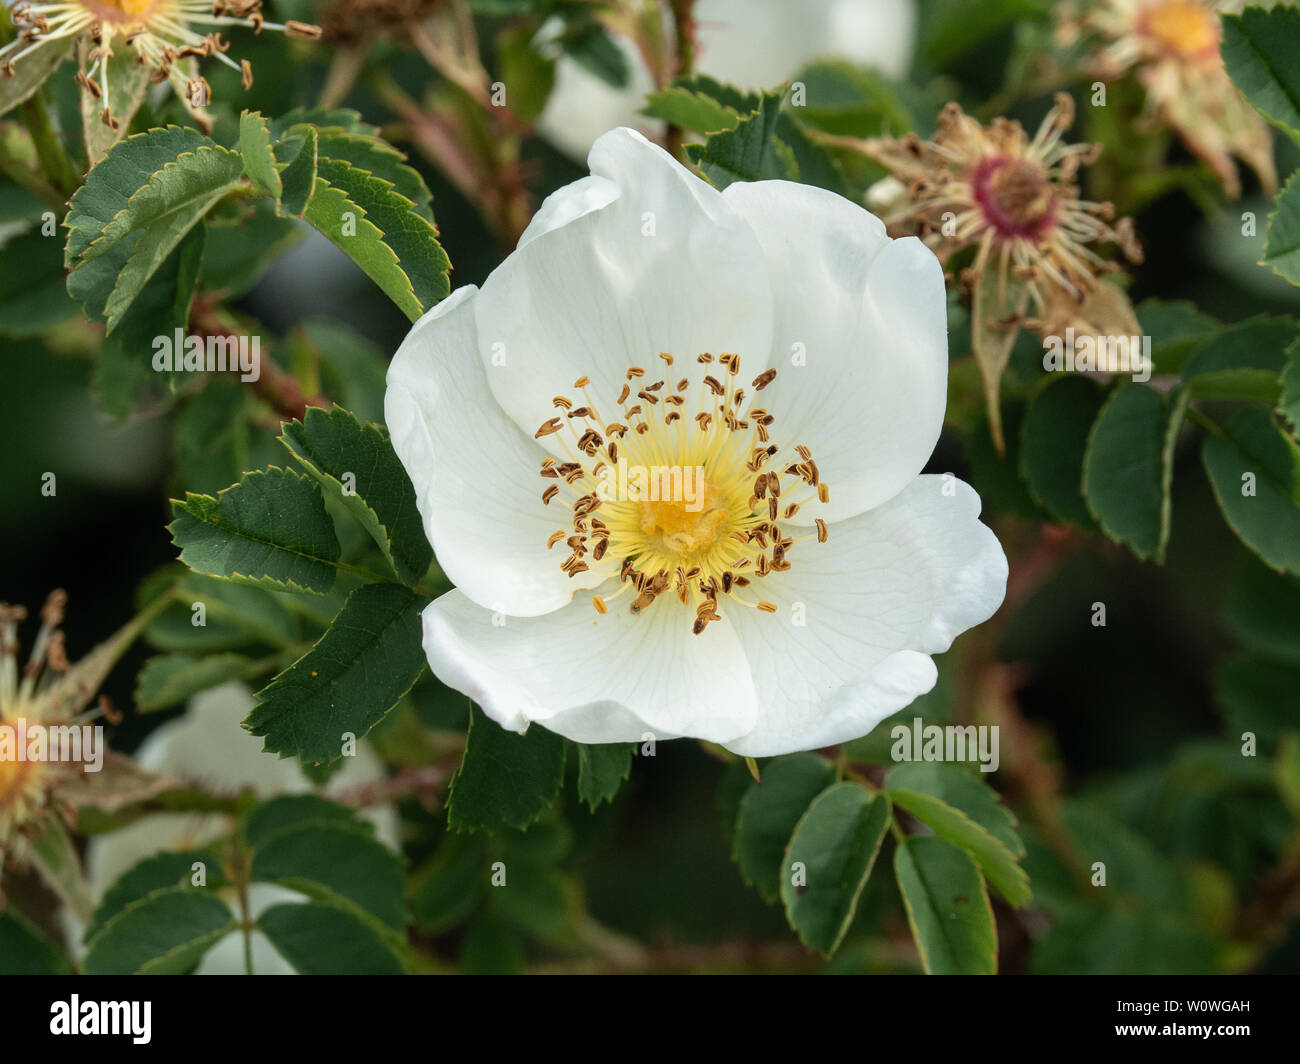 A single white flower of a species rose showing the golden stamens Stock Photo